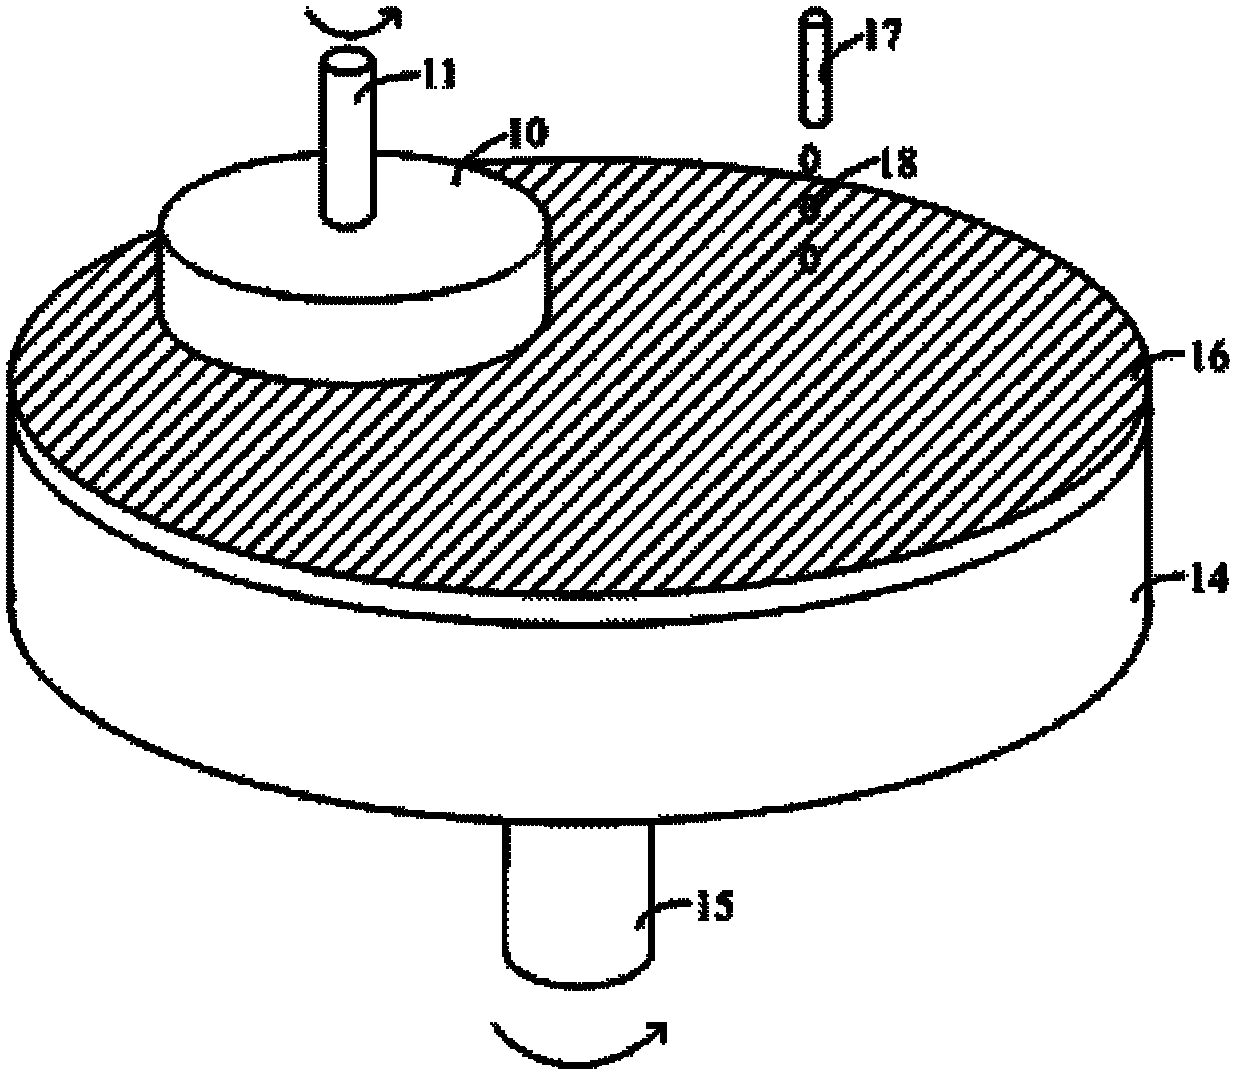 Chemical mechanical lapping device and system